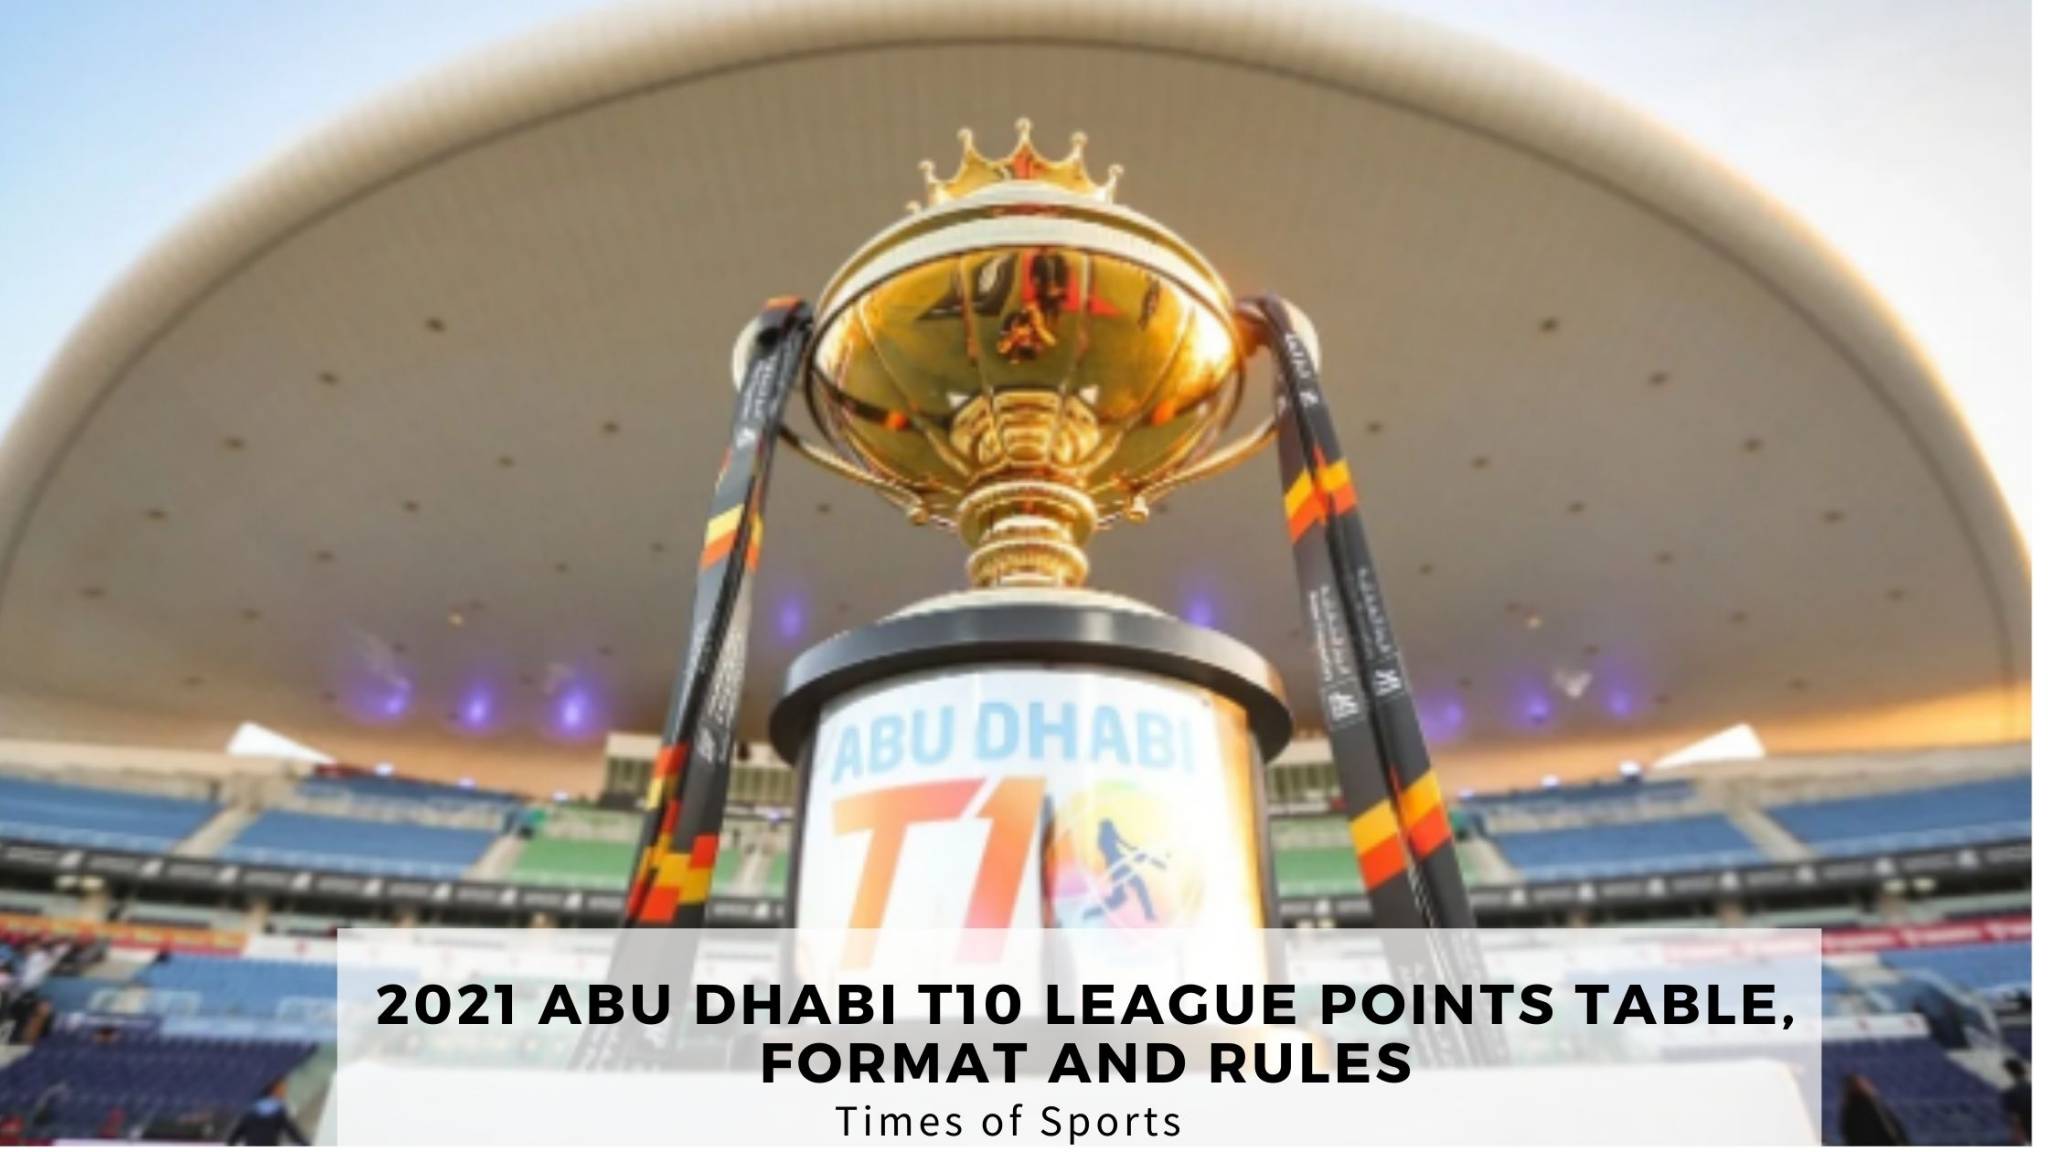 Abu Dhabi T10 League Points Table 2021, Format and Rules